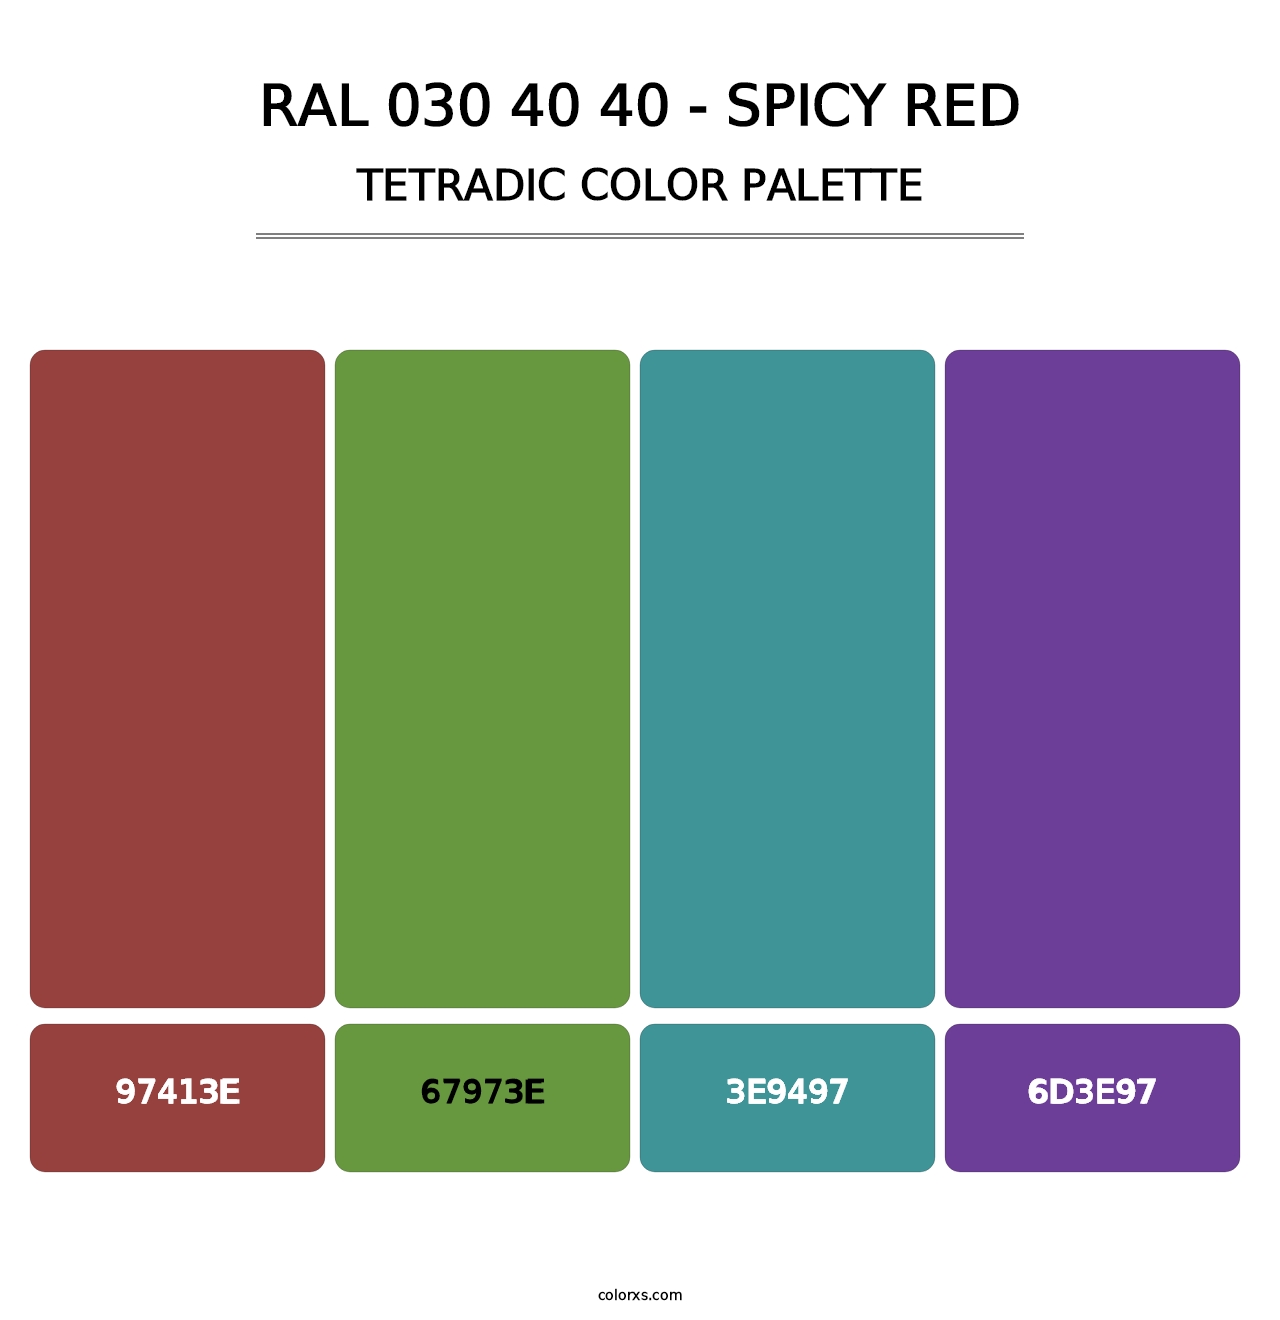 RAL 030 40 40 - Spicy Red - Tetradic Color Palette